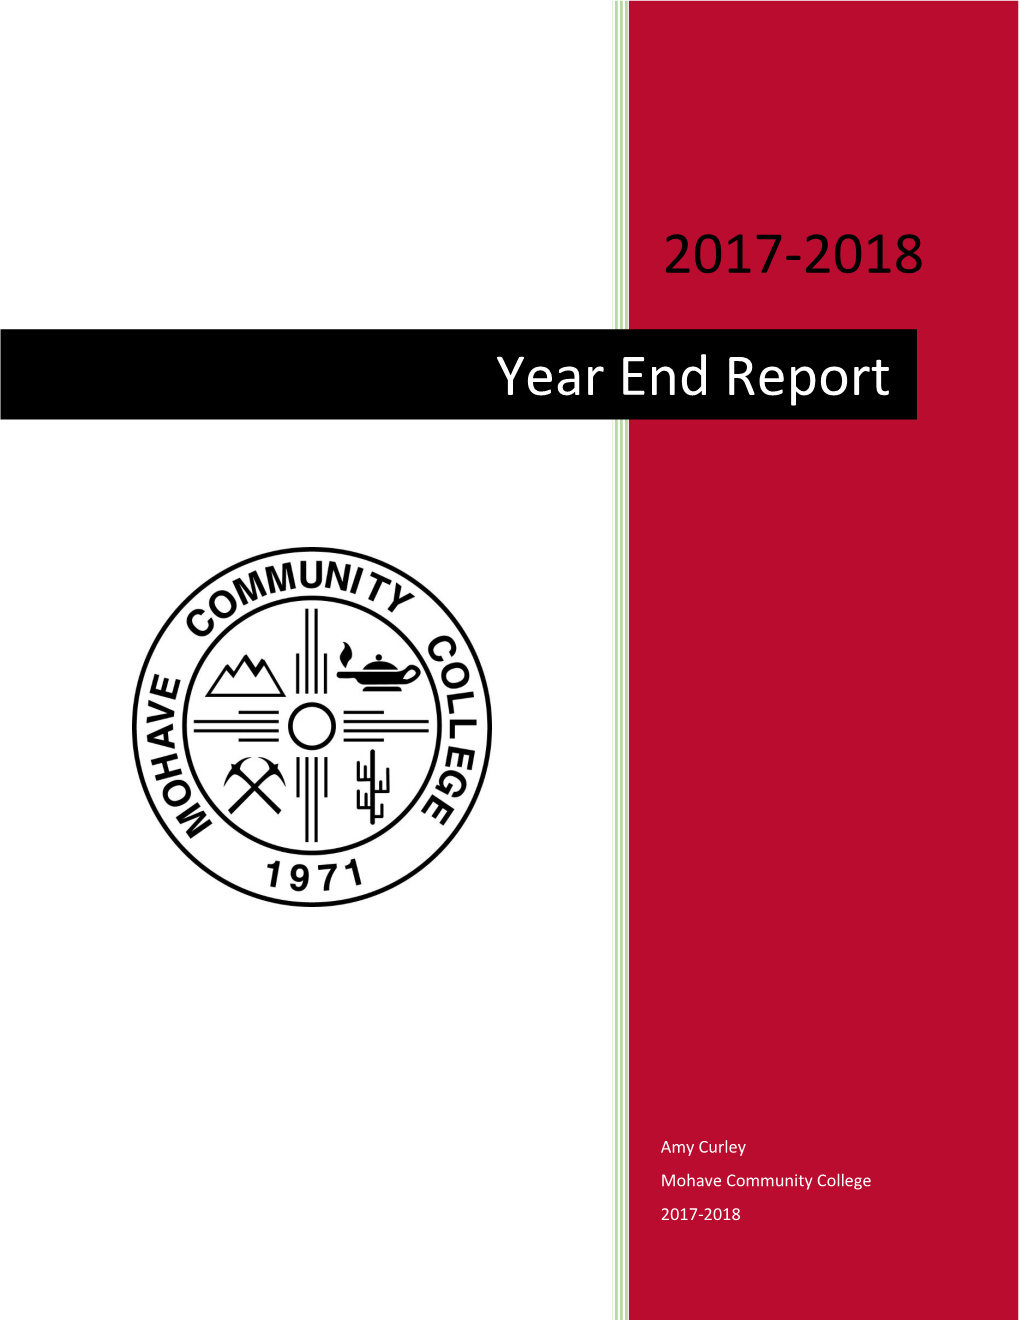 Year End Report